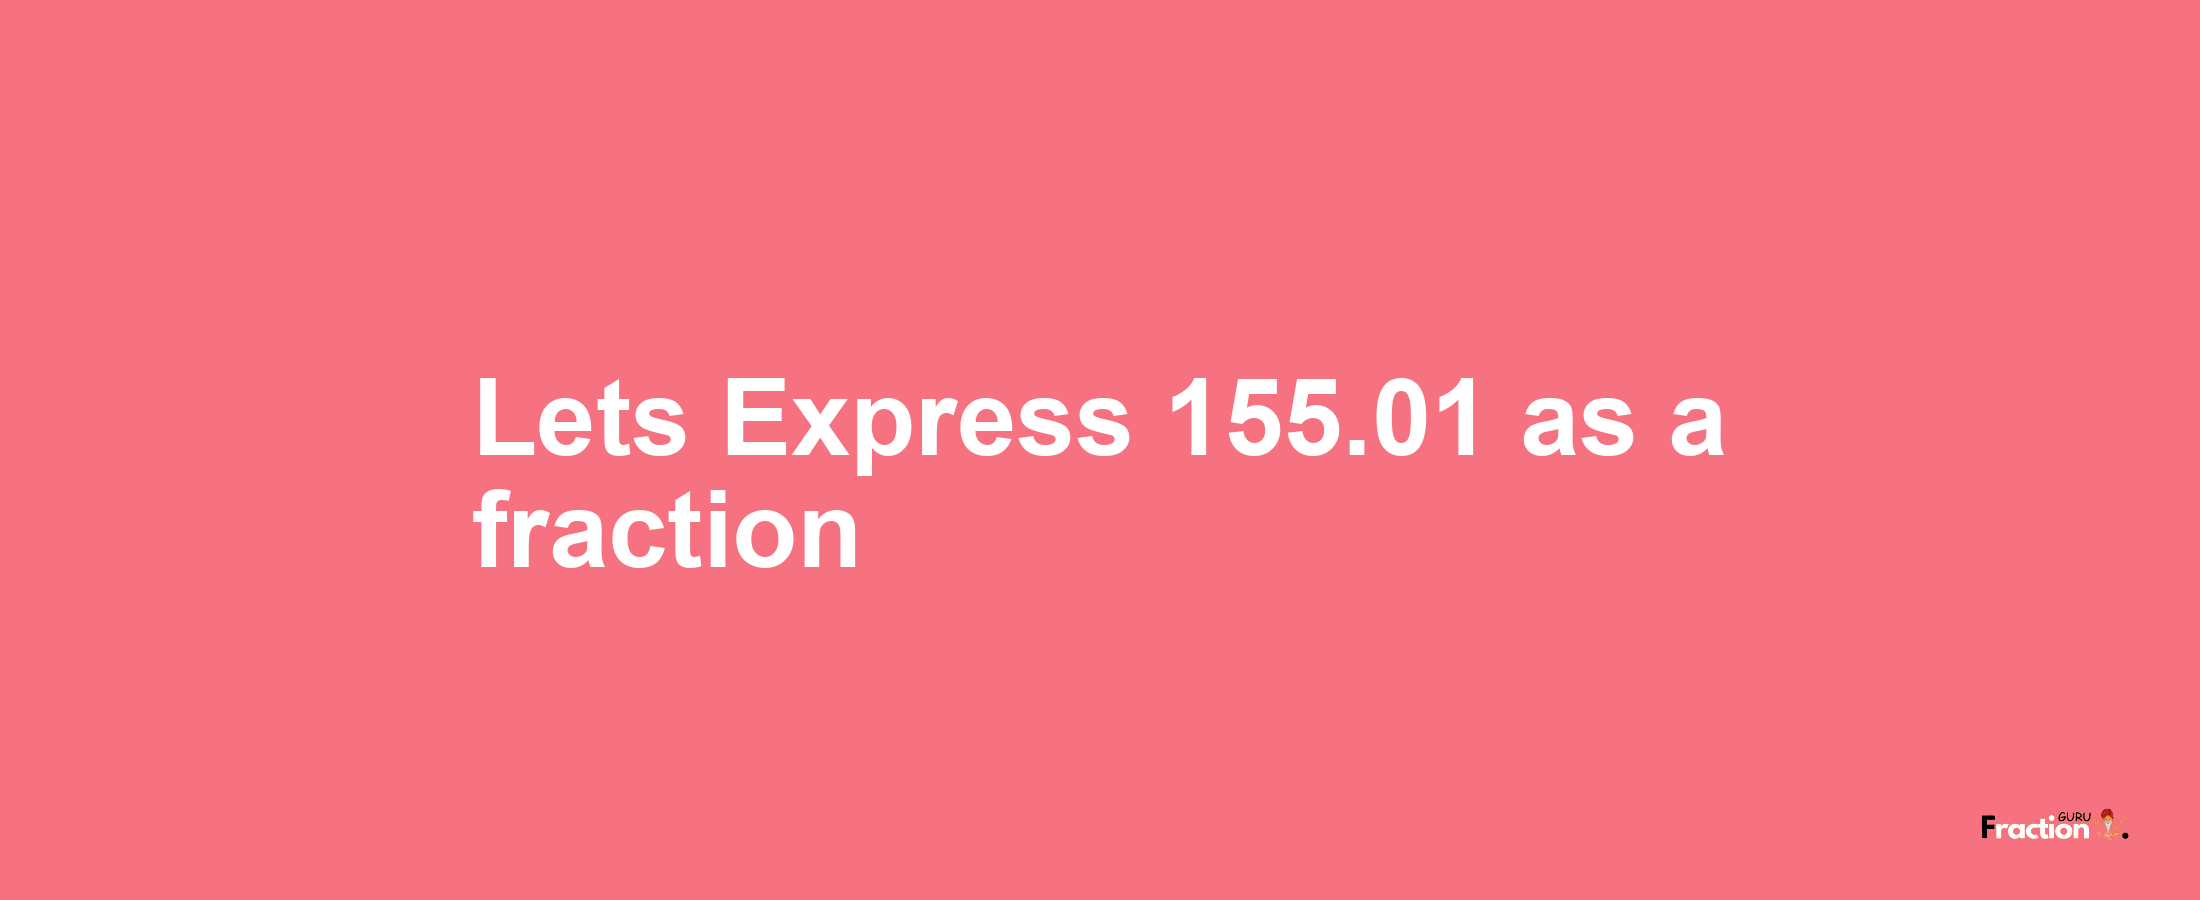 Lets Express 155.01 as afraction